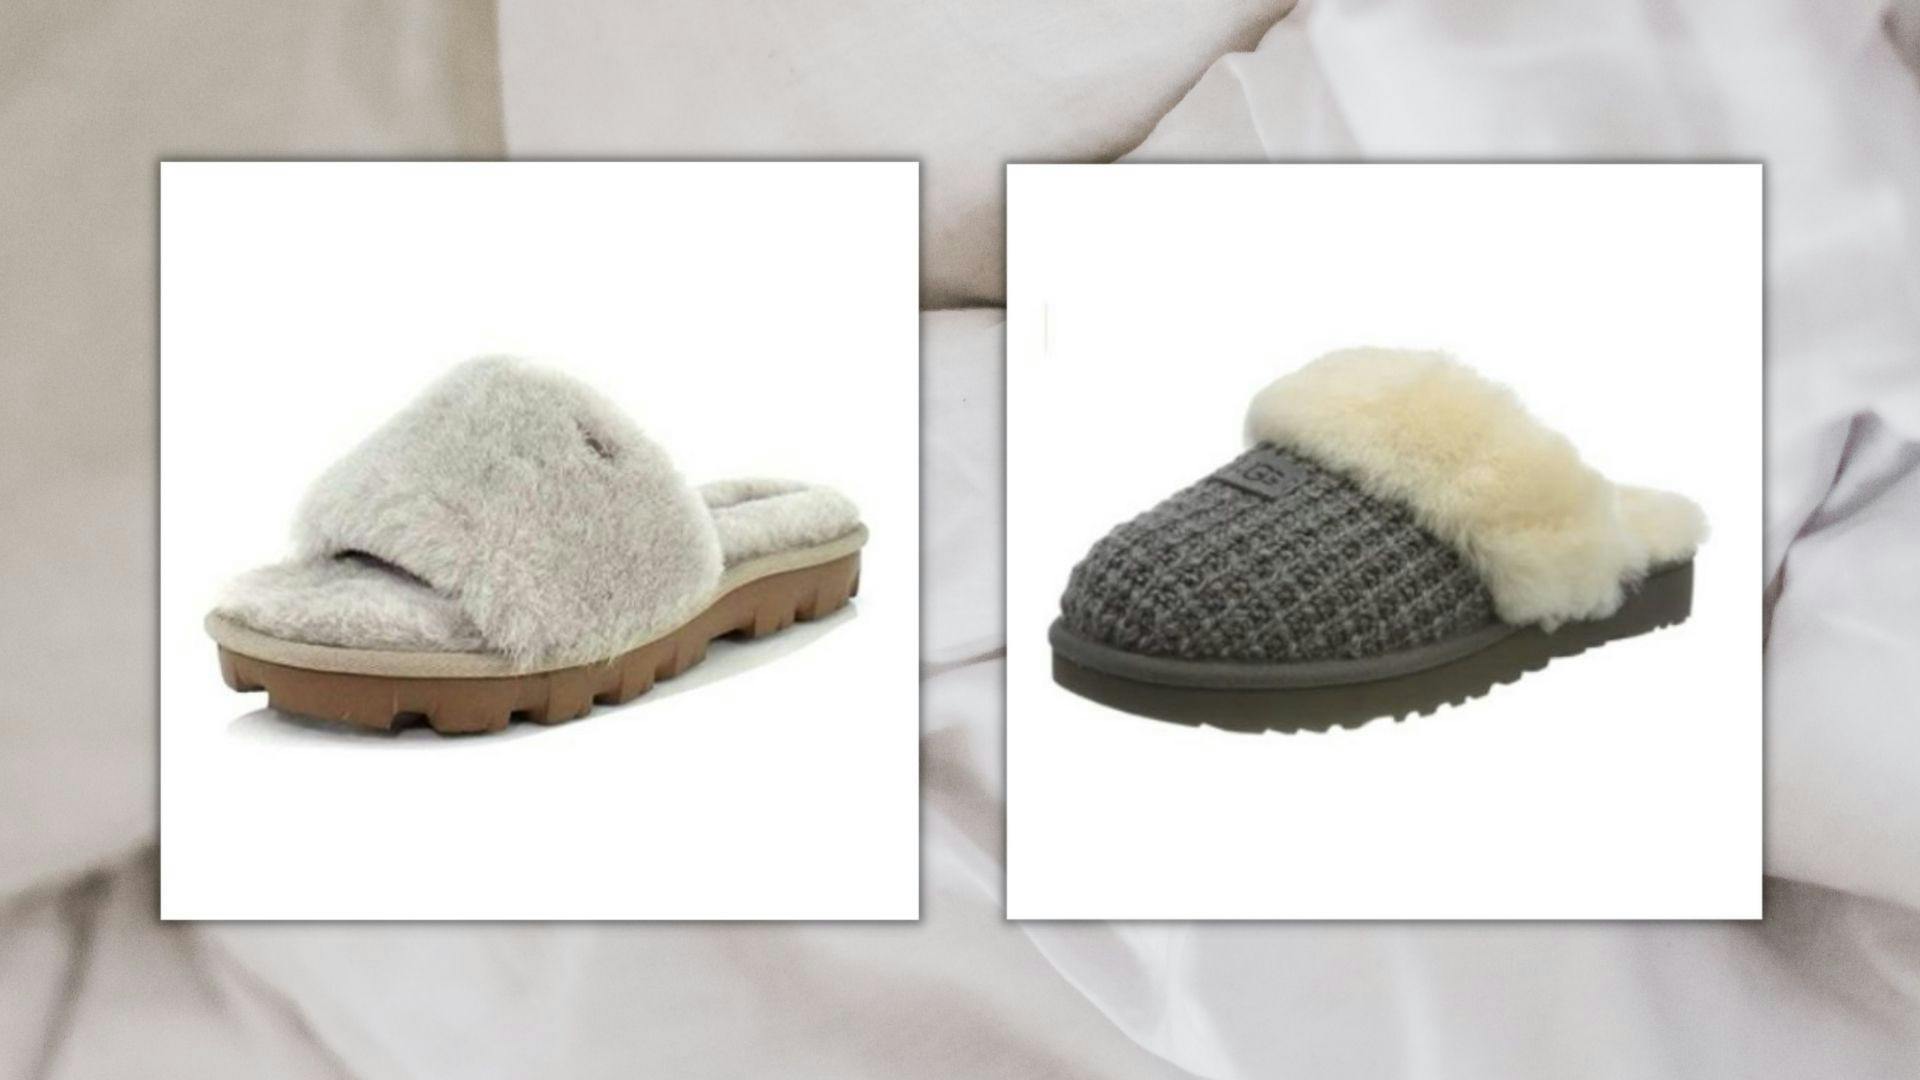 New Look's £17 Ugg slipper dupes feel like you're 'walking on clouds' -  Liverpool Echo